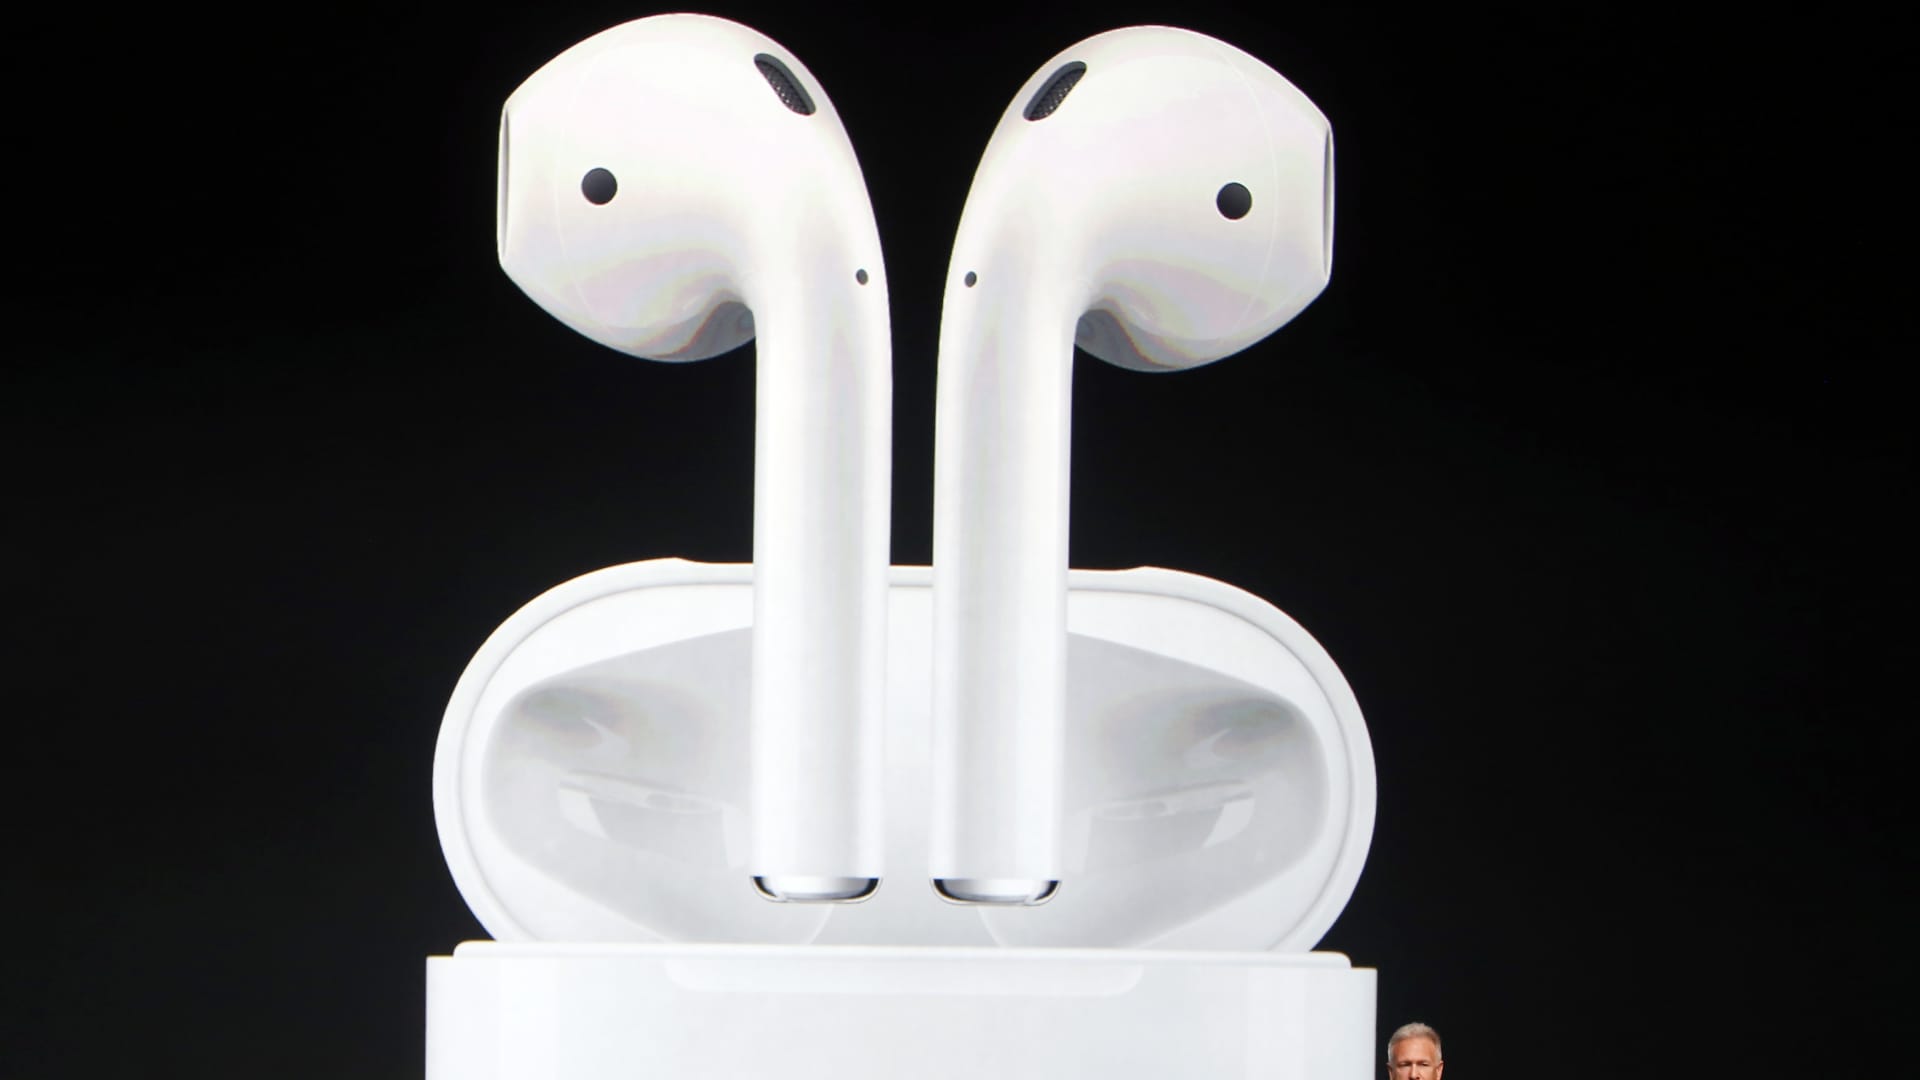 You got new AirPods for the holidays — here's how to get the most out of them